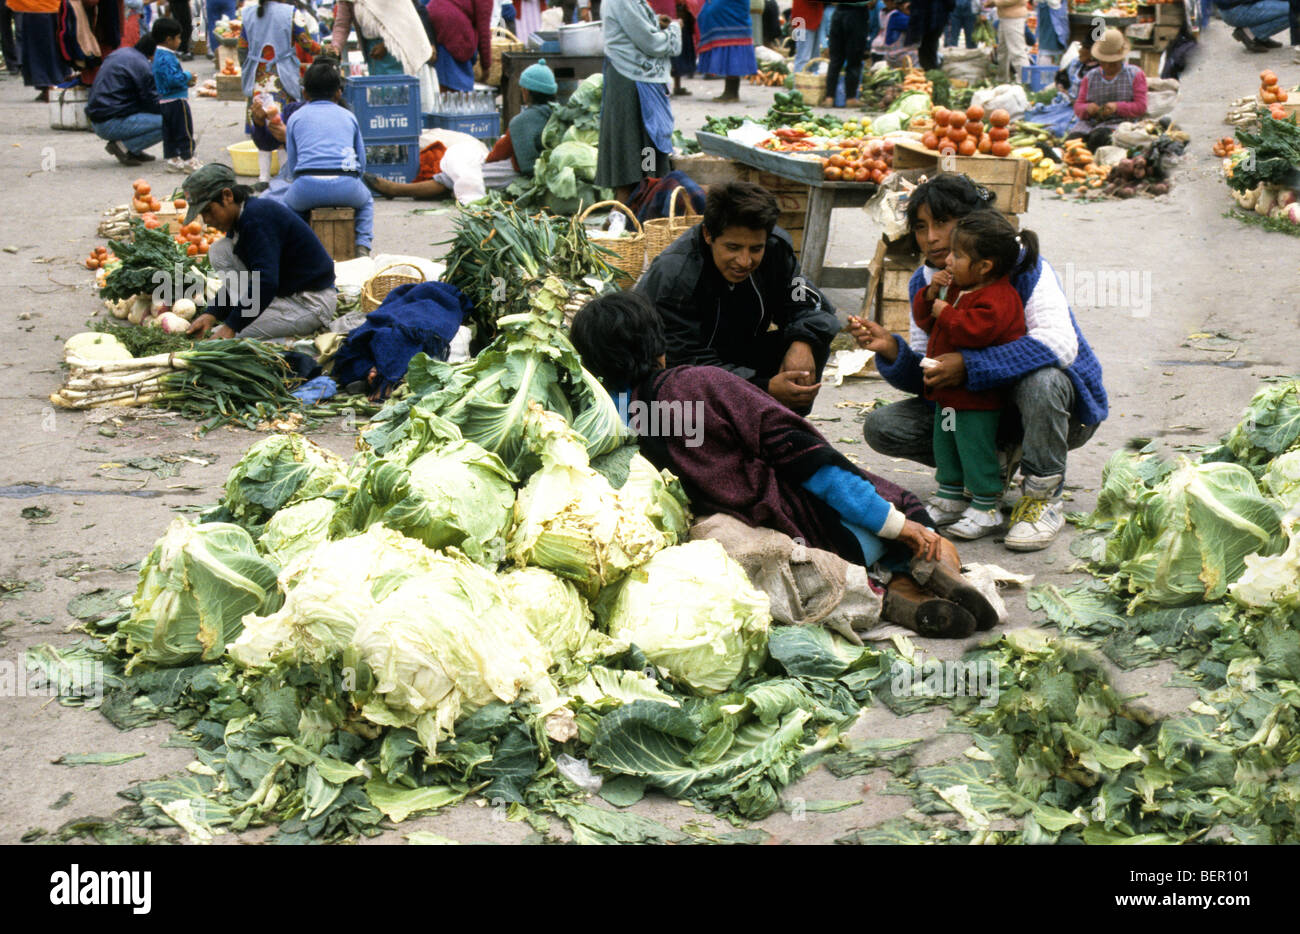 Pile of giant cabbages for sale in local upland Ecuador market. Stock Photo